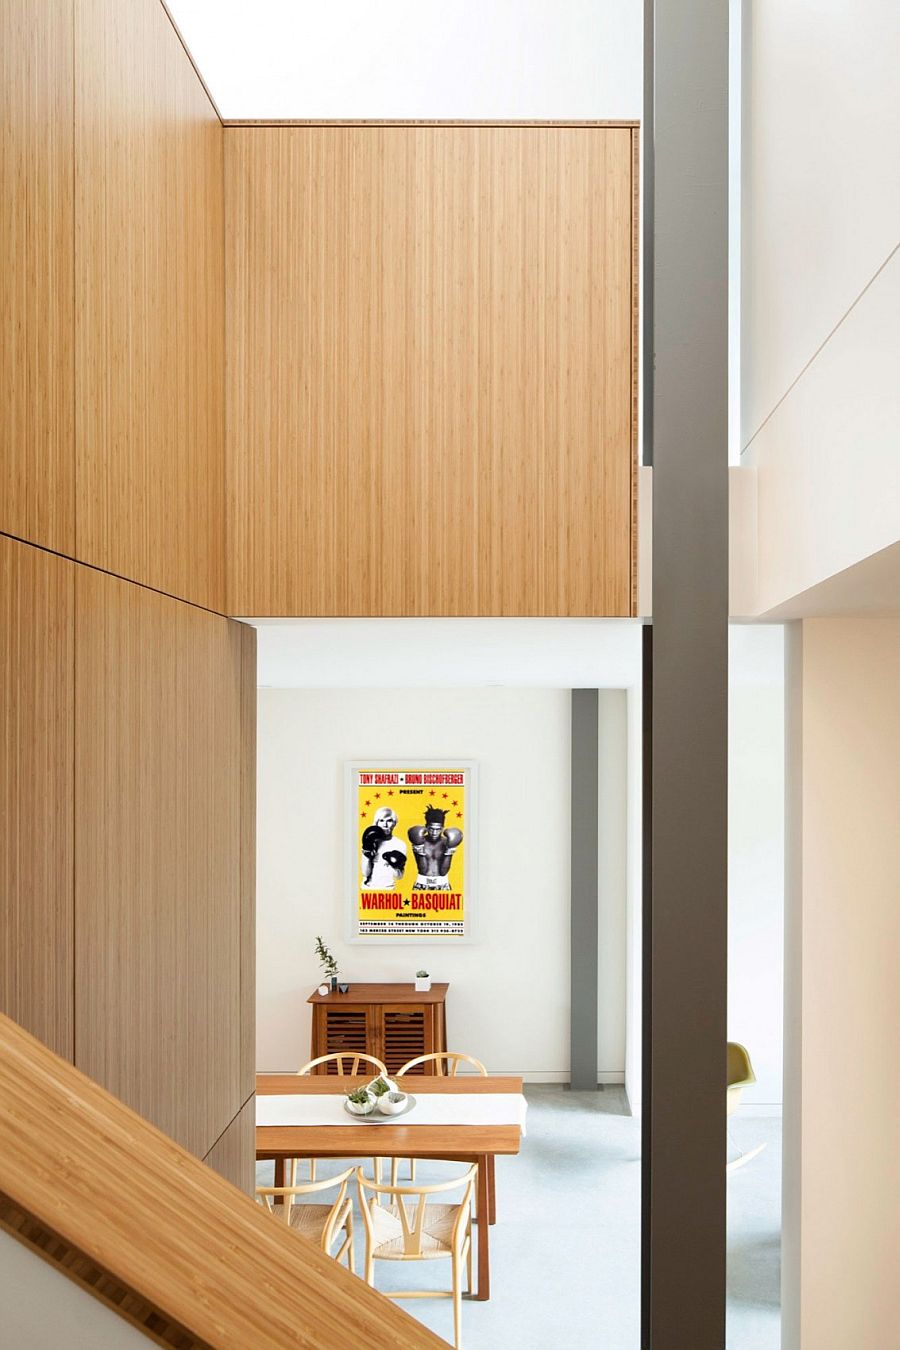 Poster adds color to the neutral interior in white